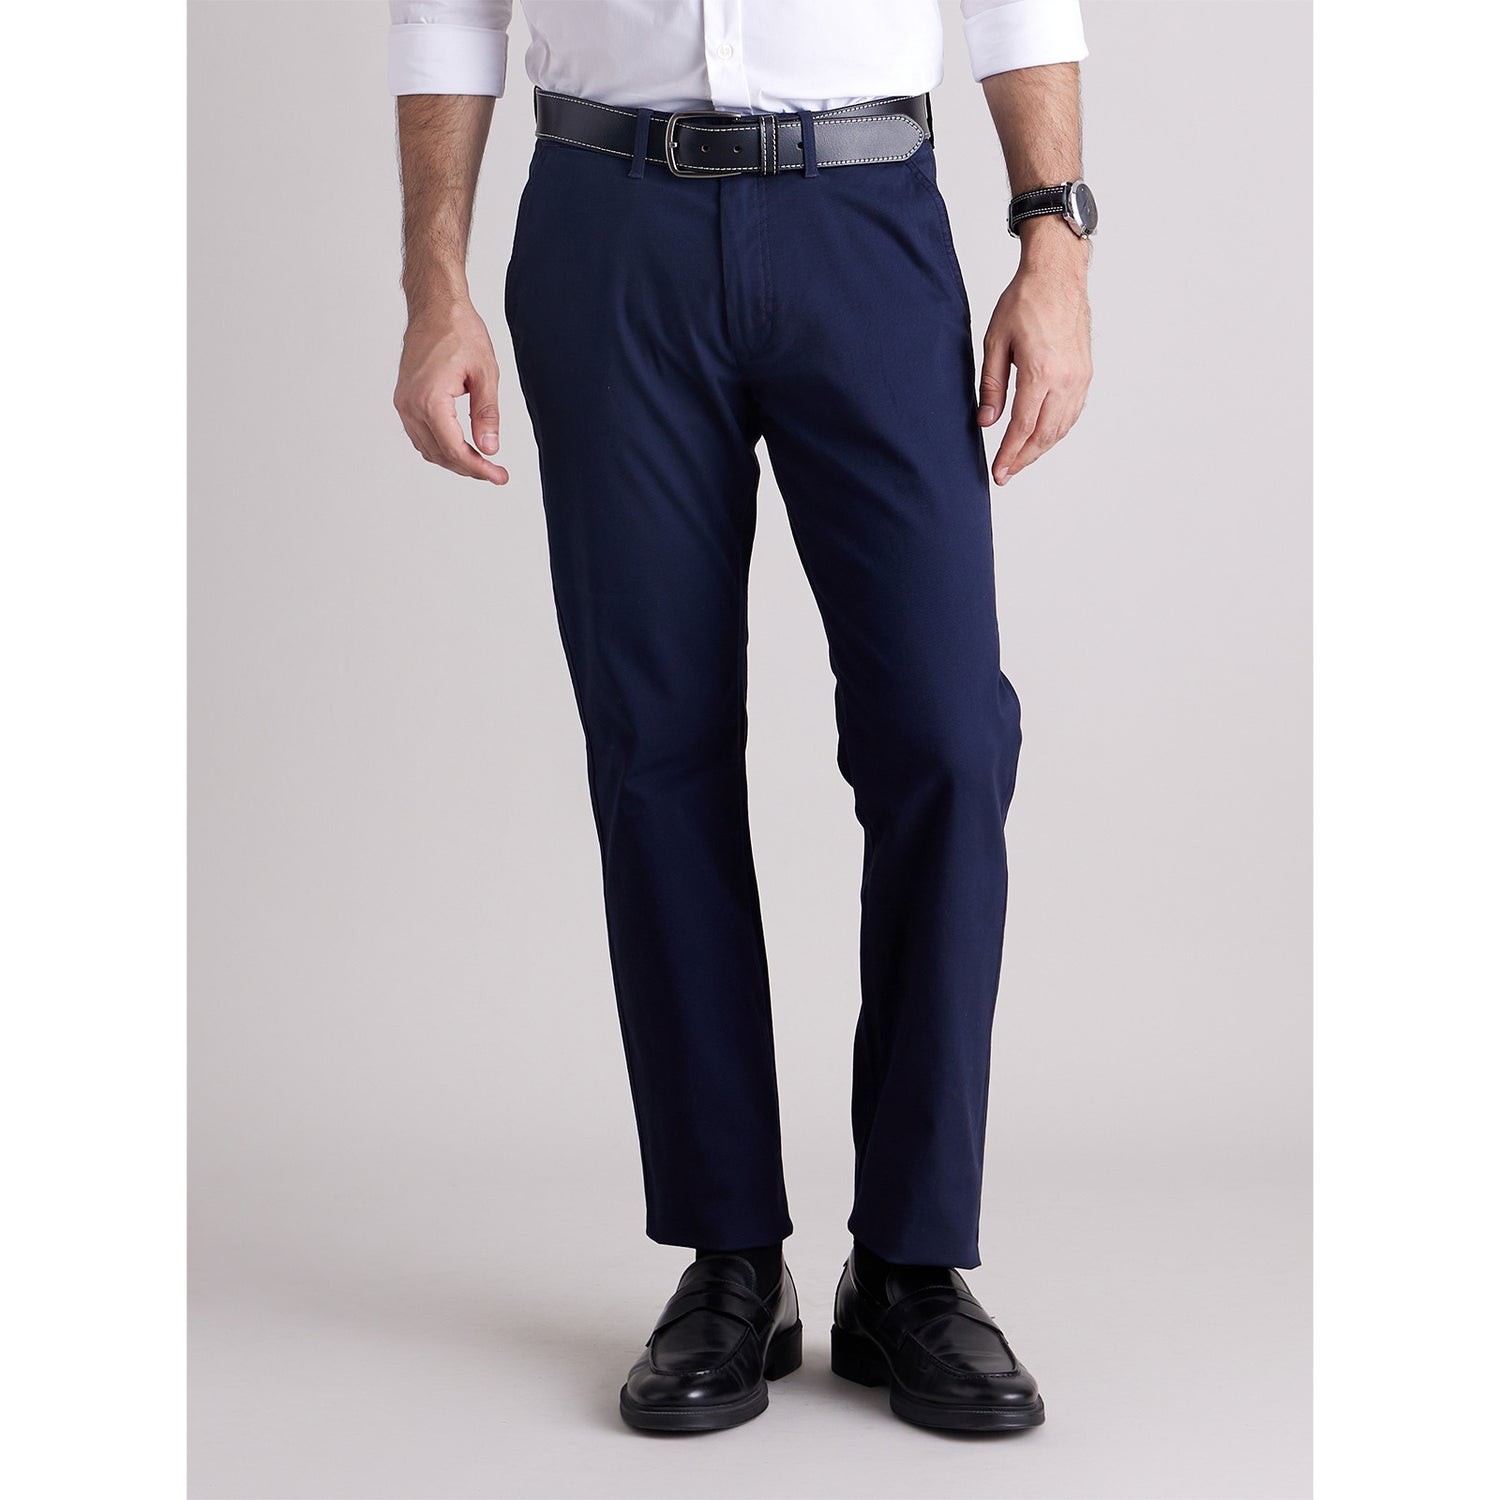 Navy Blue Regular Fit Cotton Chinos Trousers (TOHENRI)